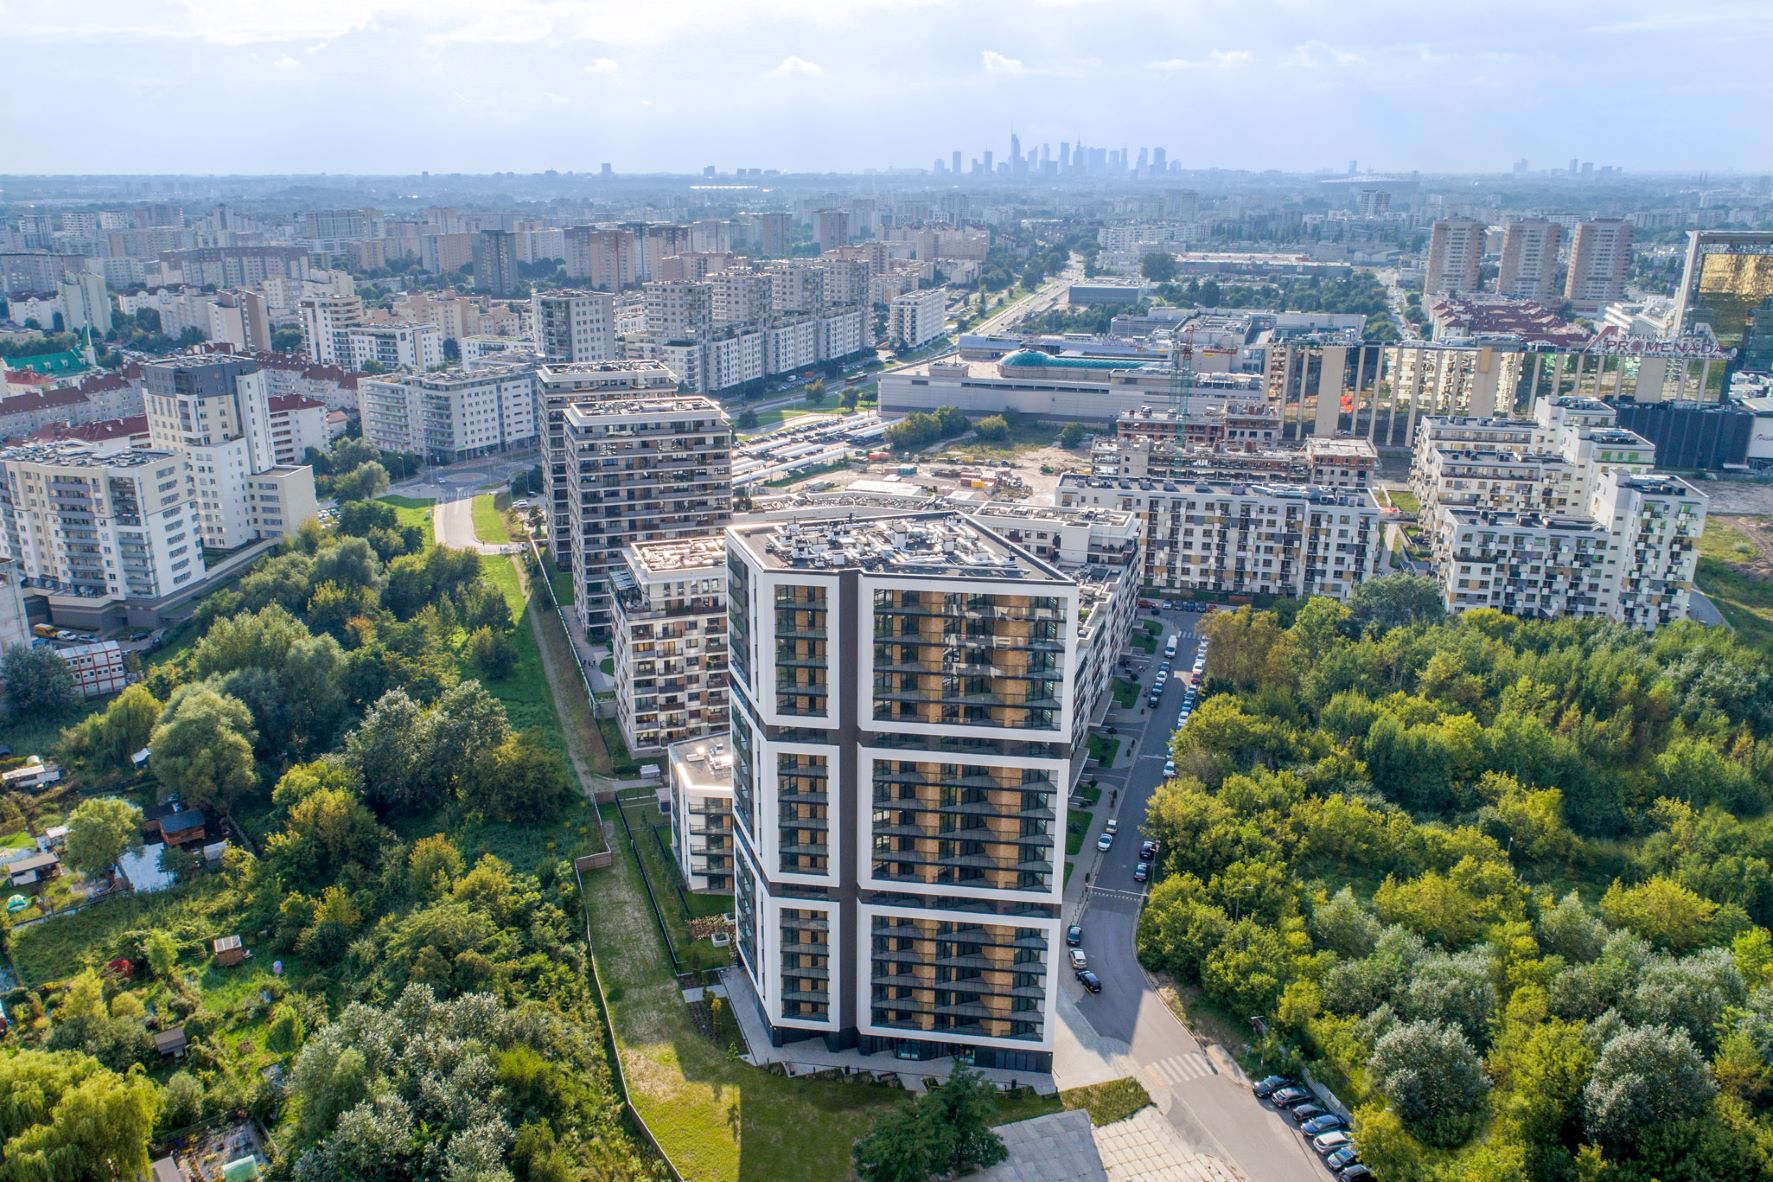 Cordia completes its tallest residential building so far